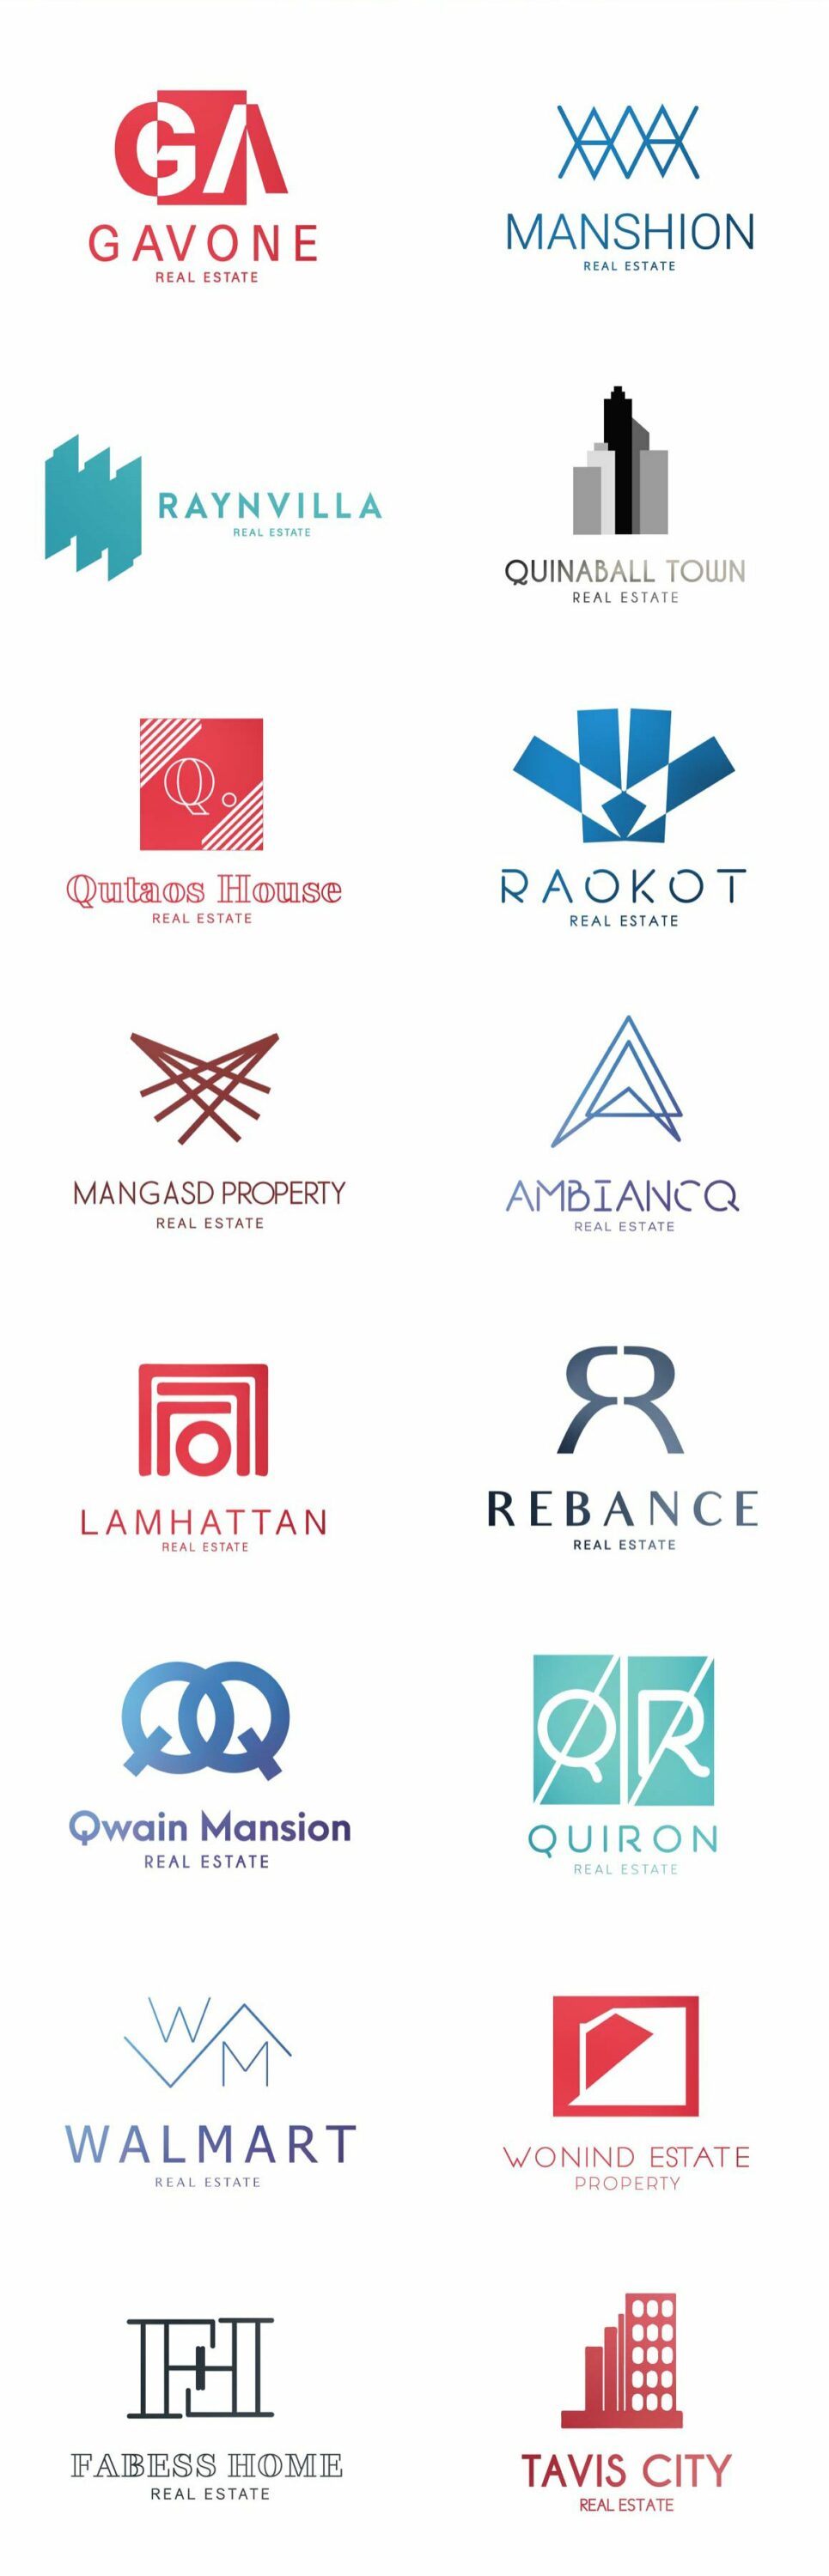 Nice minimalistic logos for real estate projects.